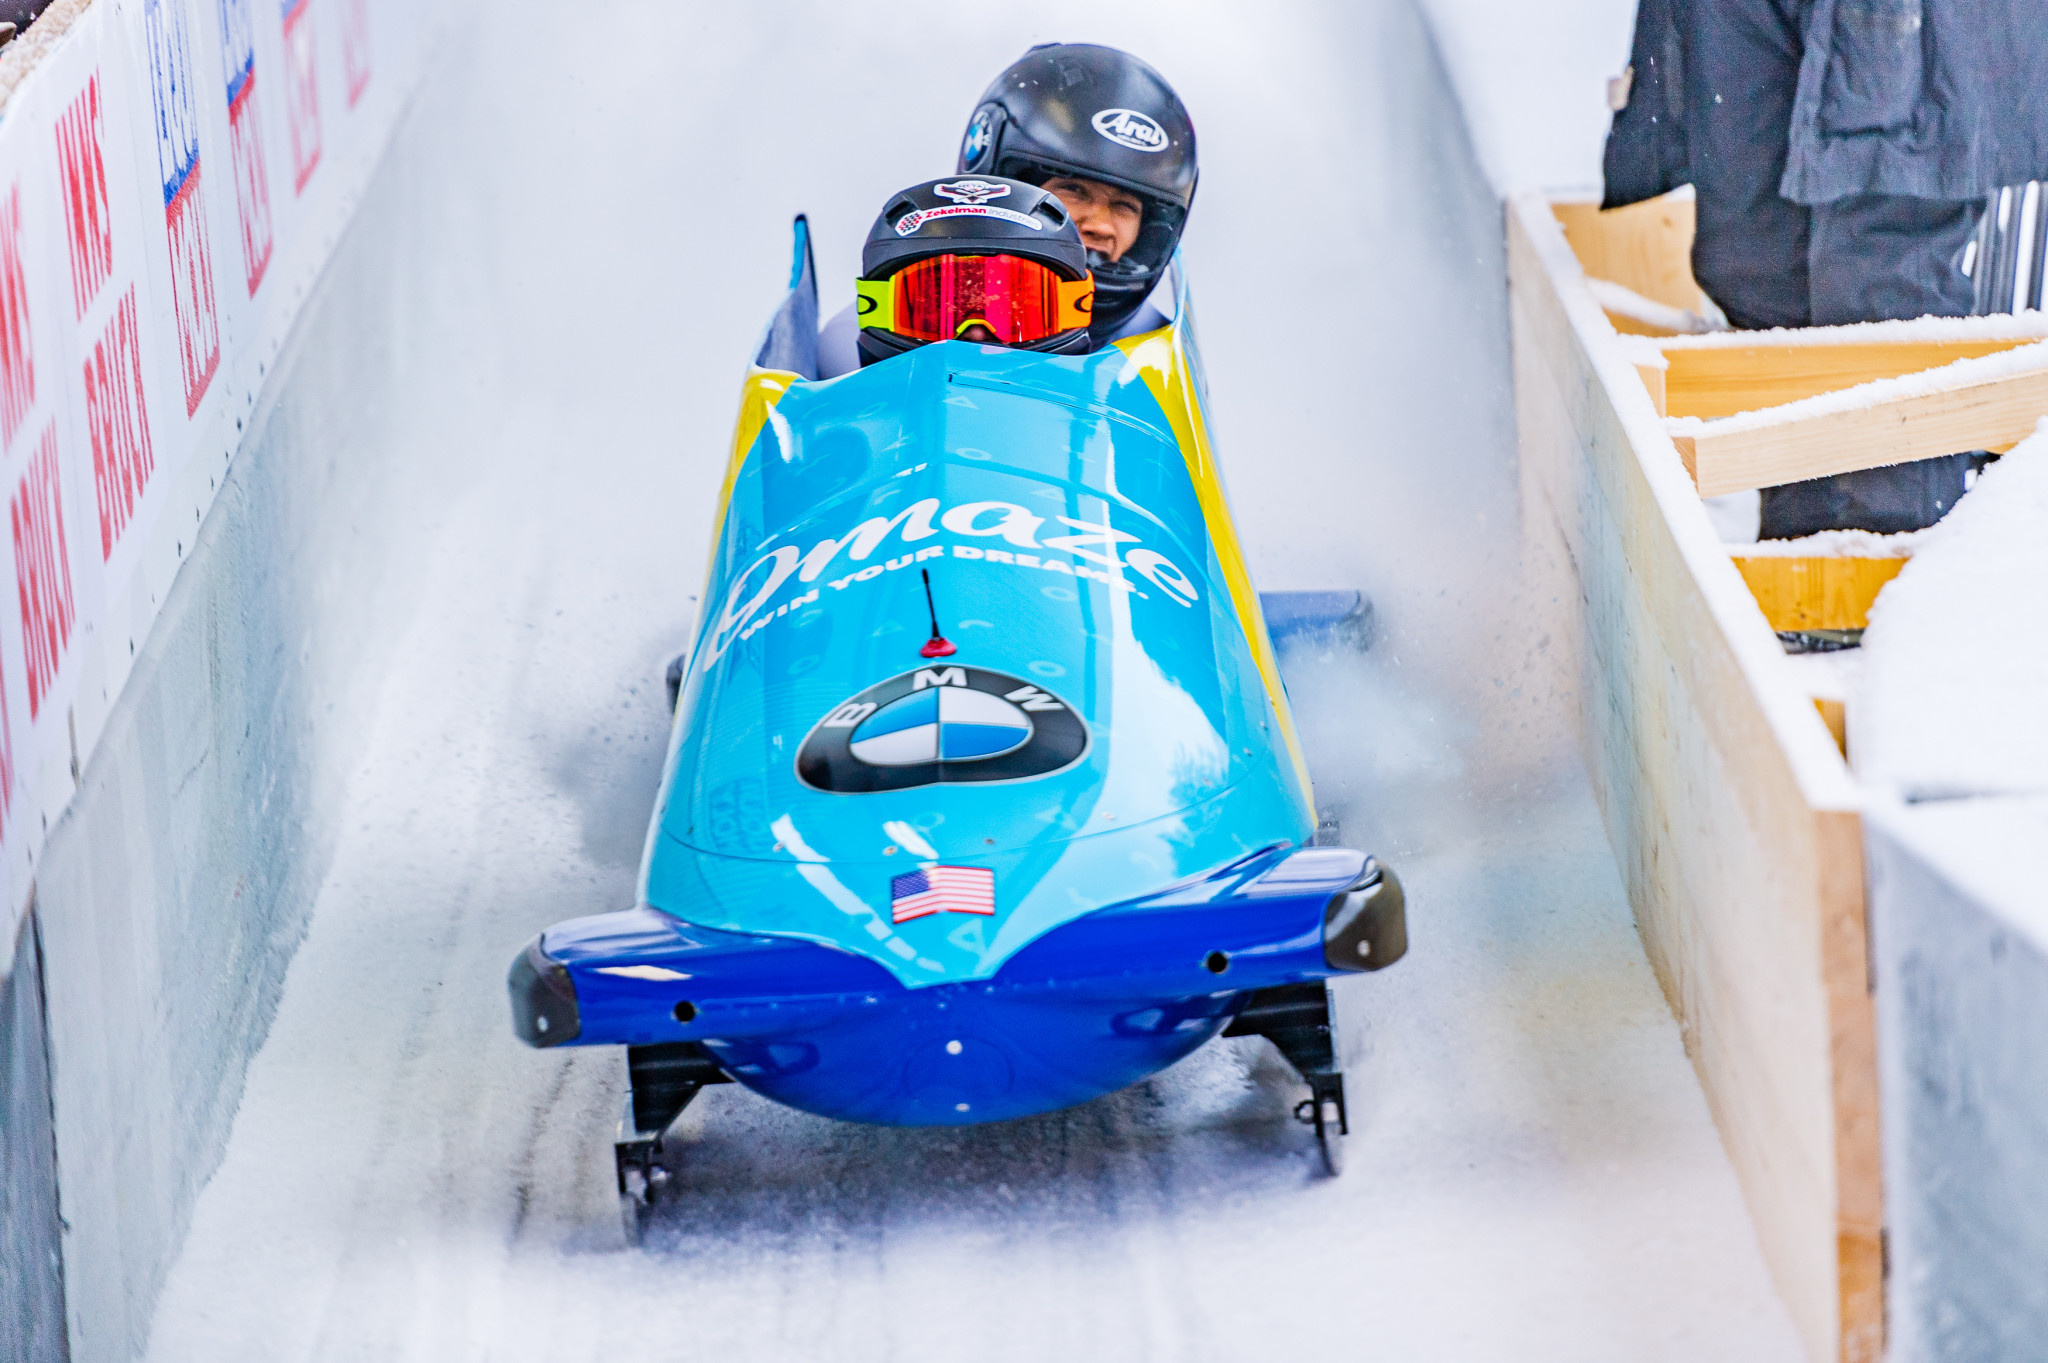 Bobsleigh: Kaillie Humphries, The winner of the two-woman event at the World Championships. 2050x1370 HD Wallpaper.